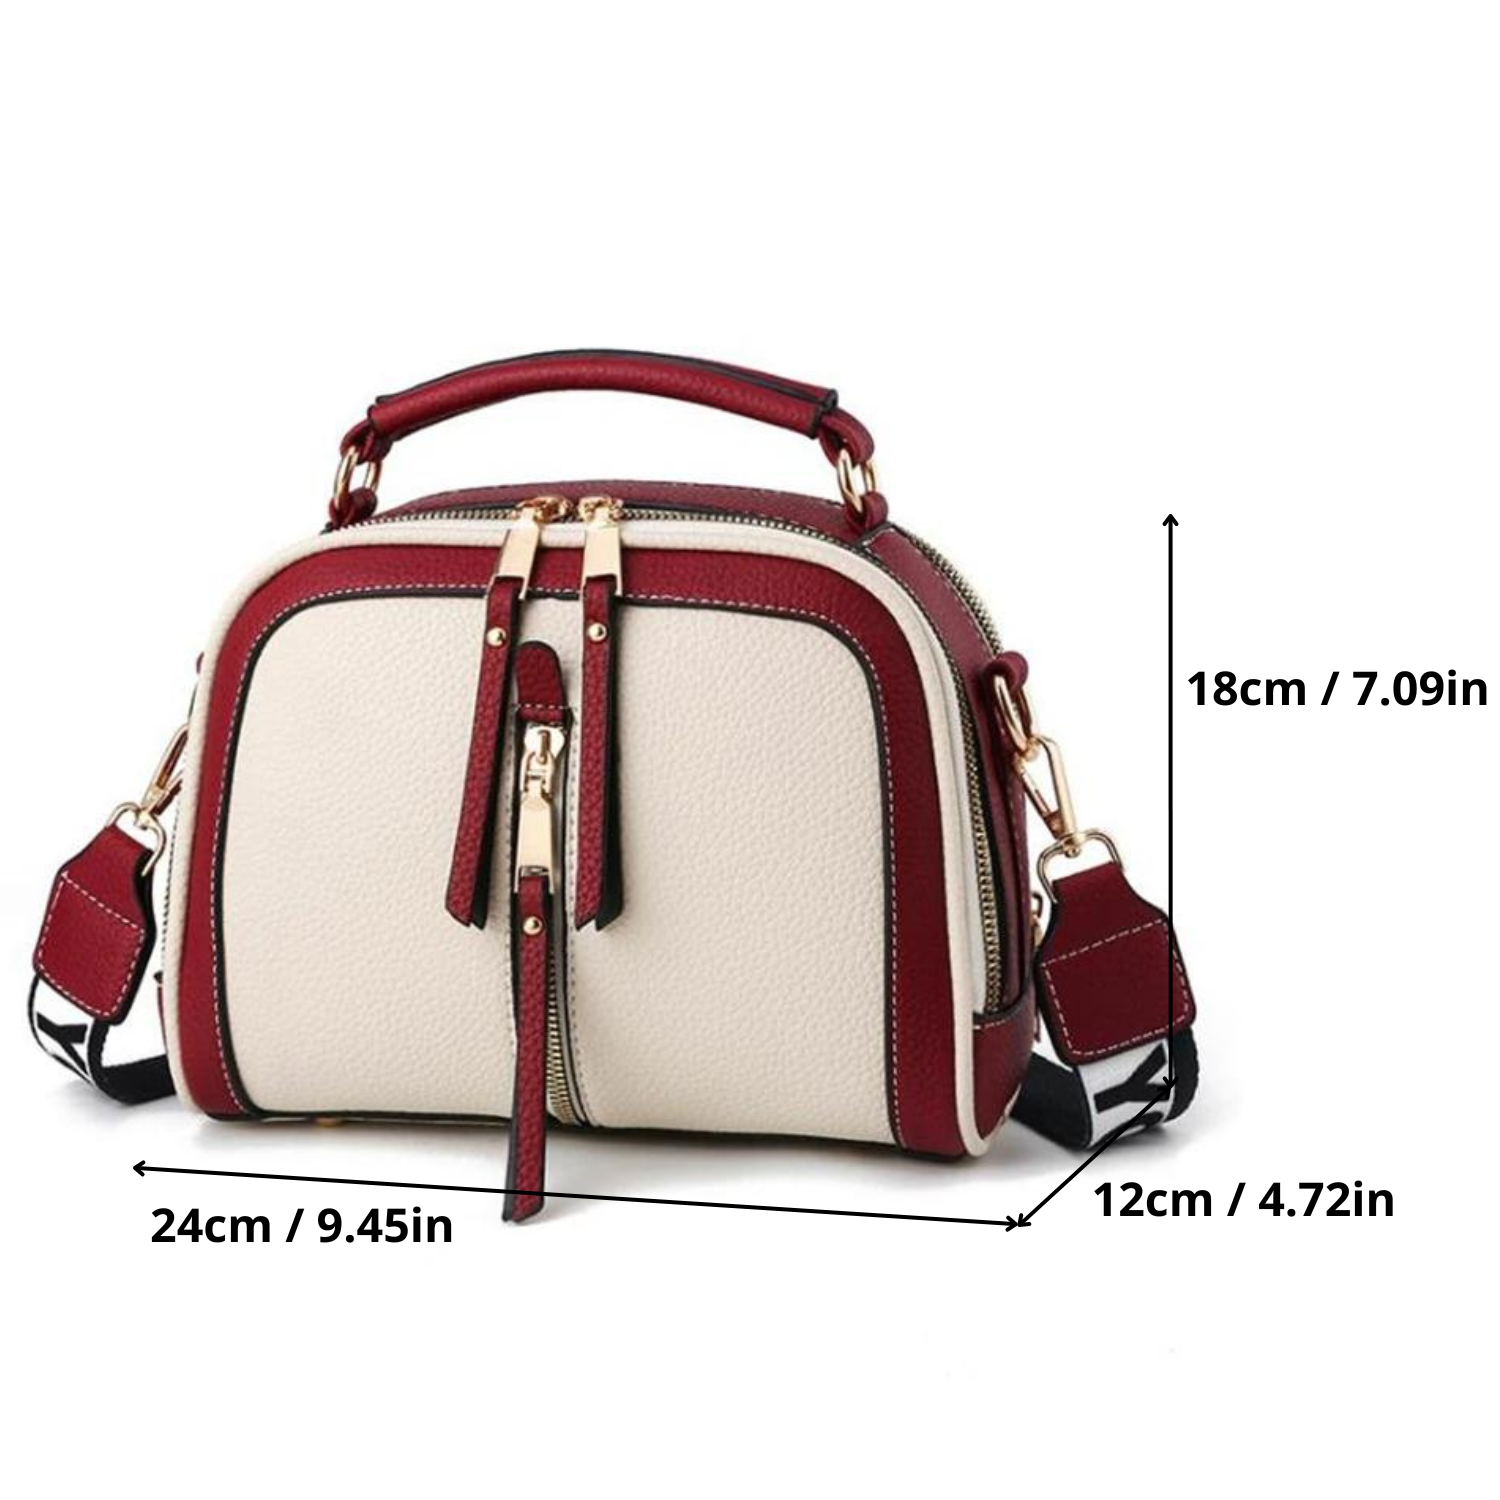 Retro Chic Contrast Crossbody Bag with Statement Strap